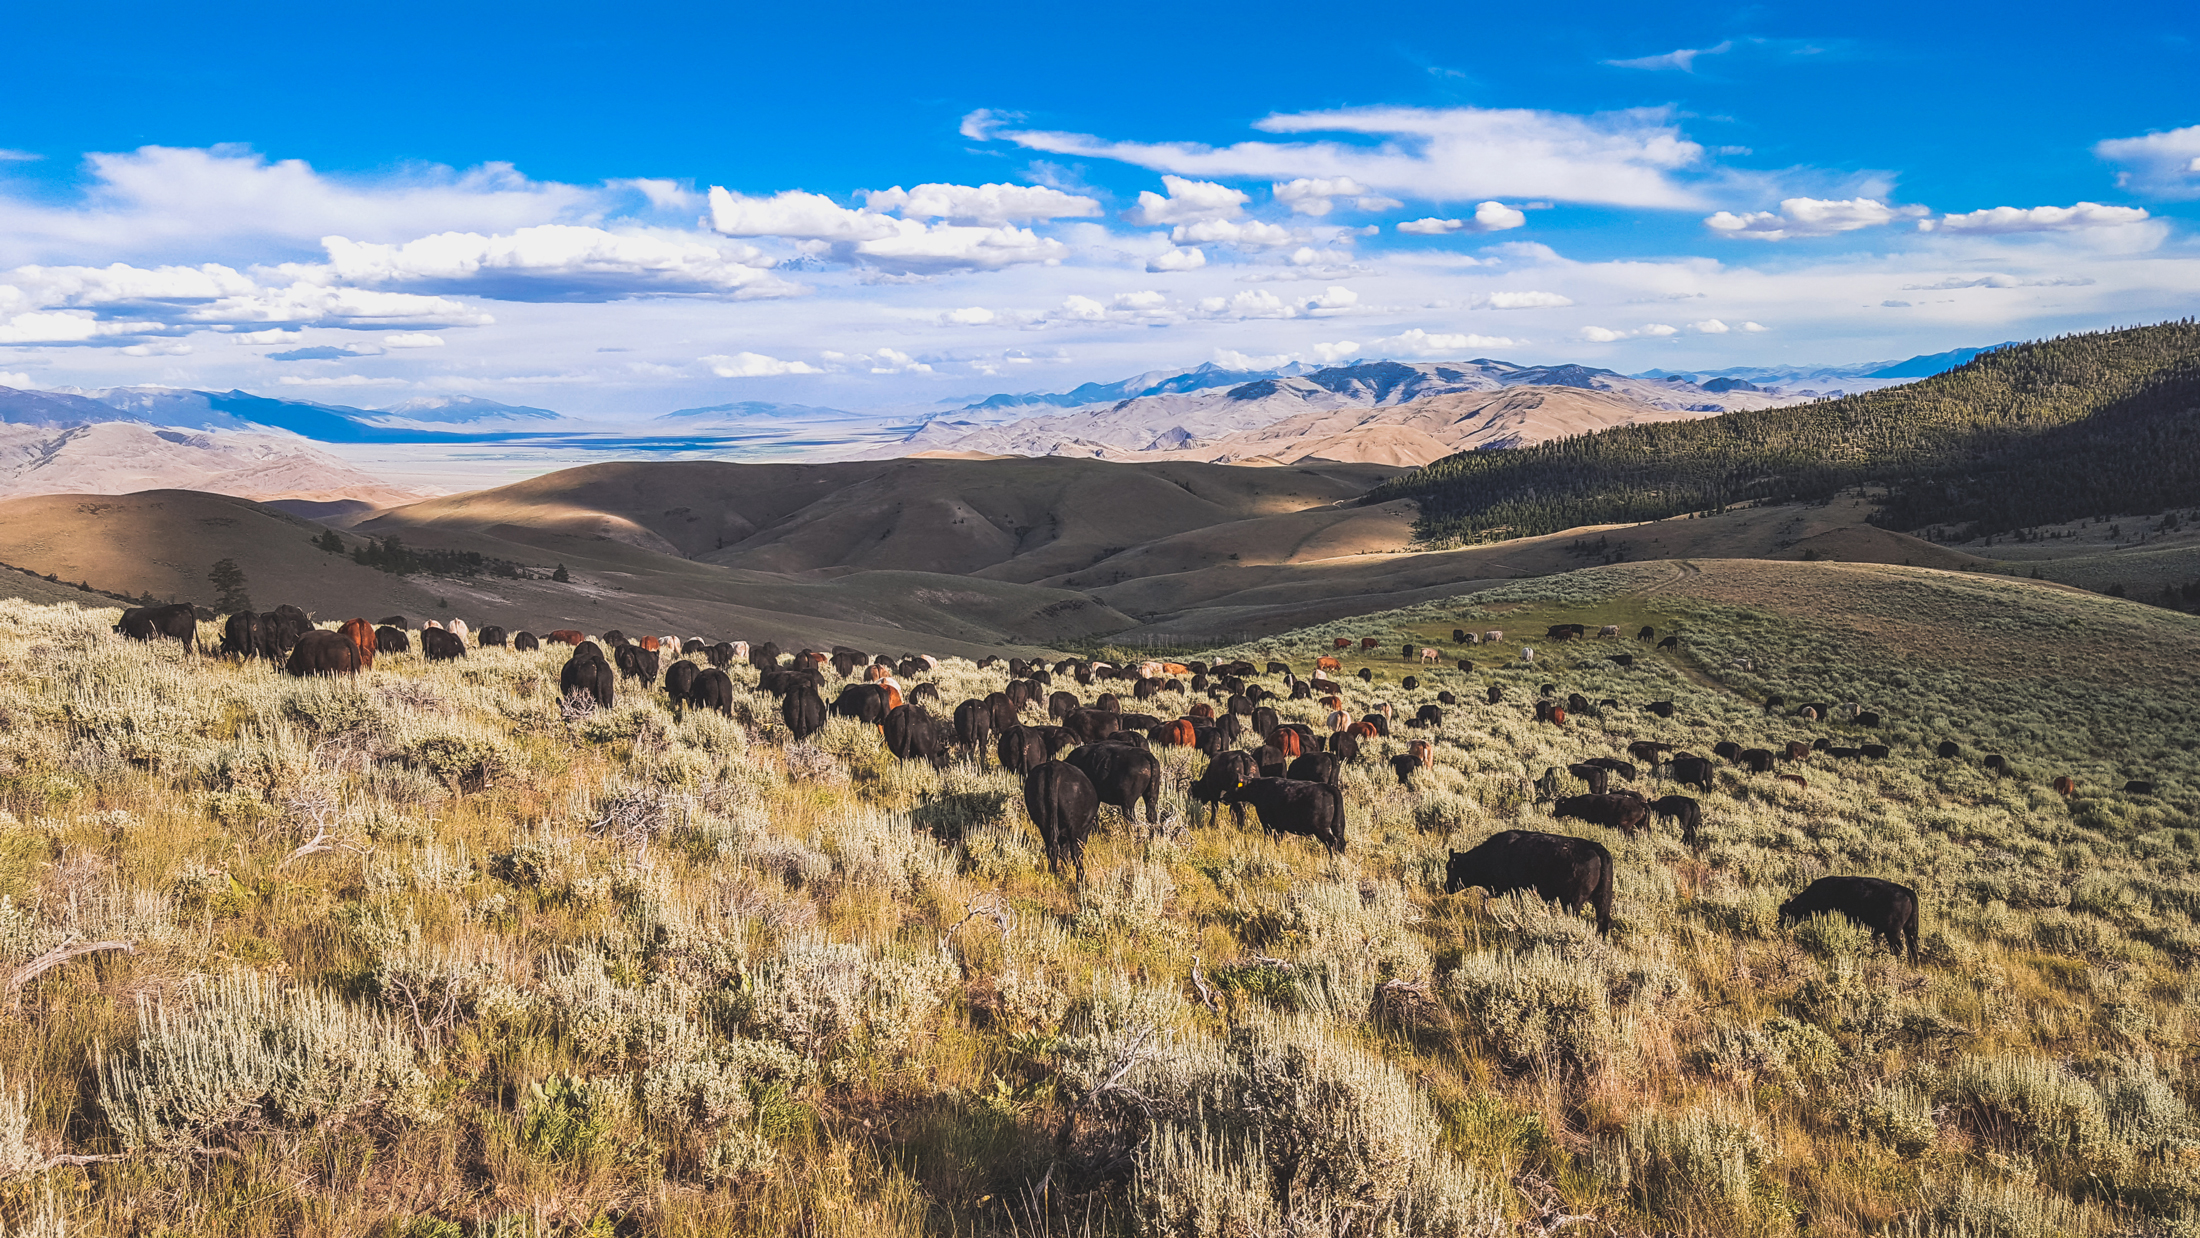 The Alderspring herd grazes lush bluebunch wheatgrass near the Sky Islands of Little Hat Creek. Lost River Range and the Pahsimeroi Valley comprise the background. Photo © Melanie Elzinga